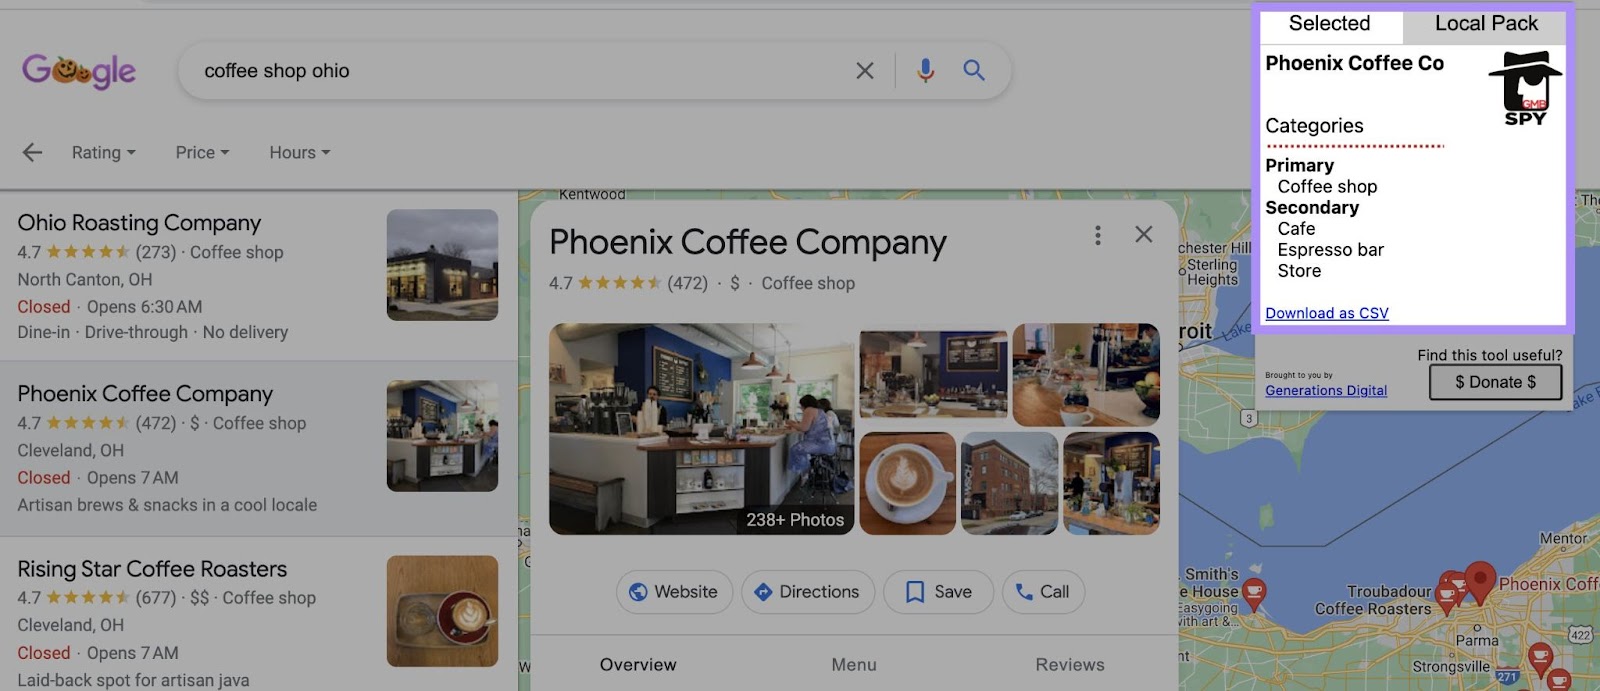 Phoenix Coffee Co's categories shown with GMBspy extension